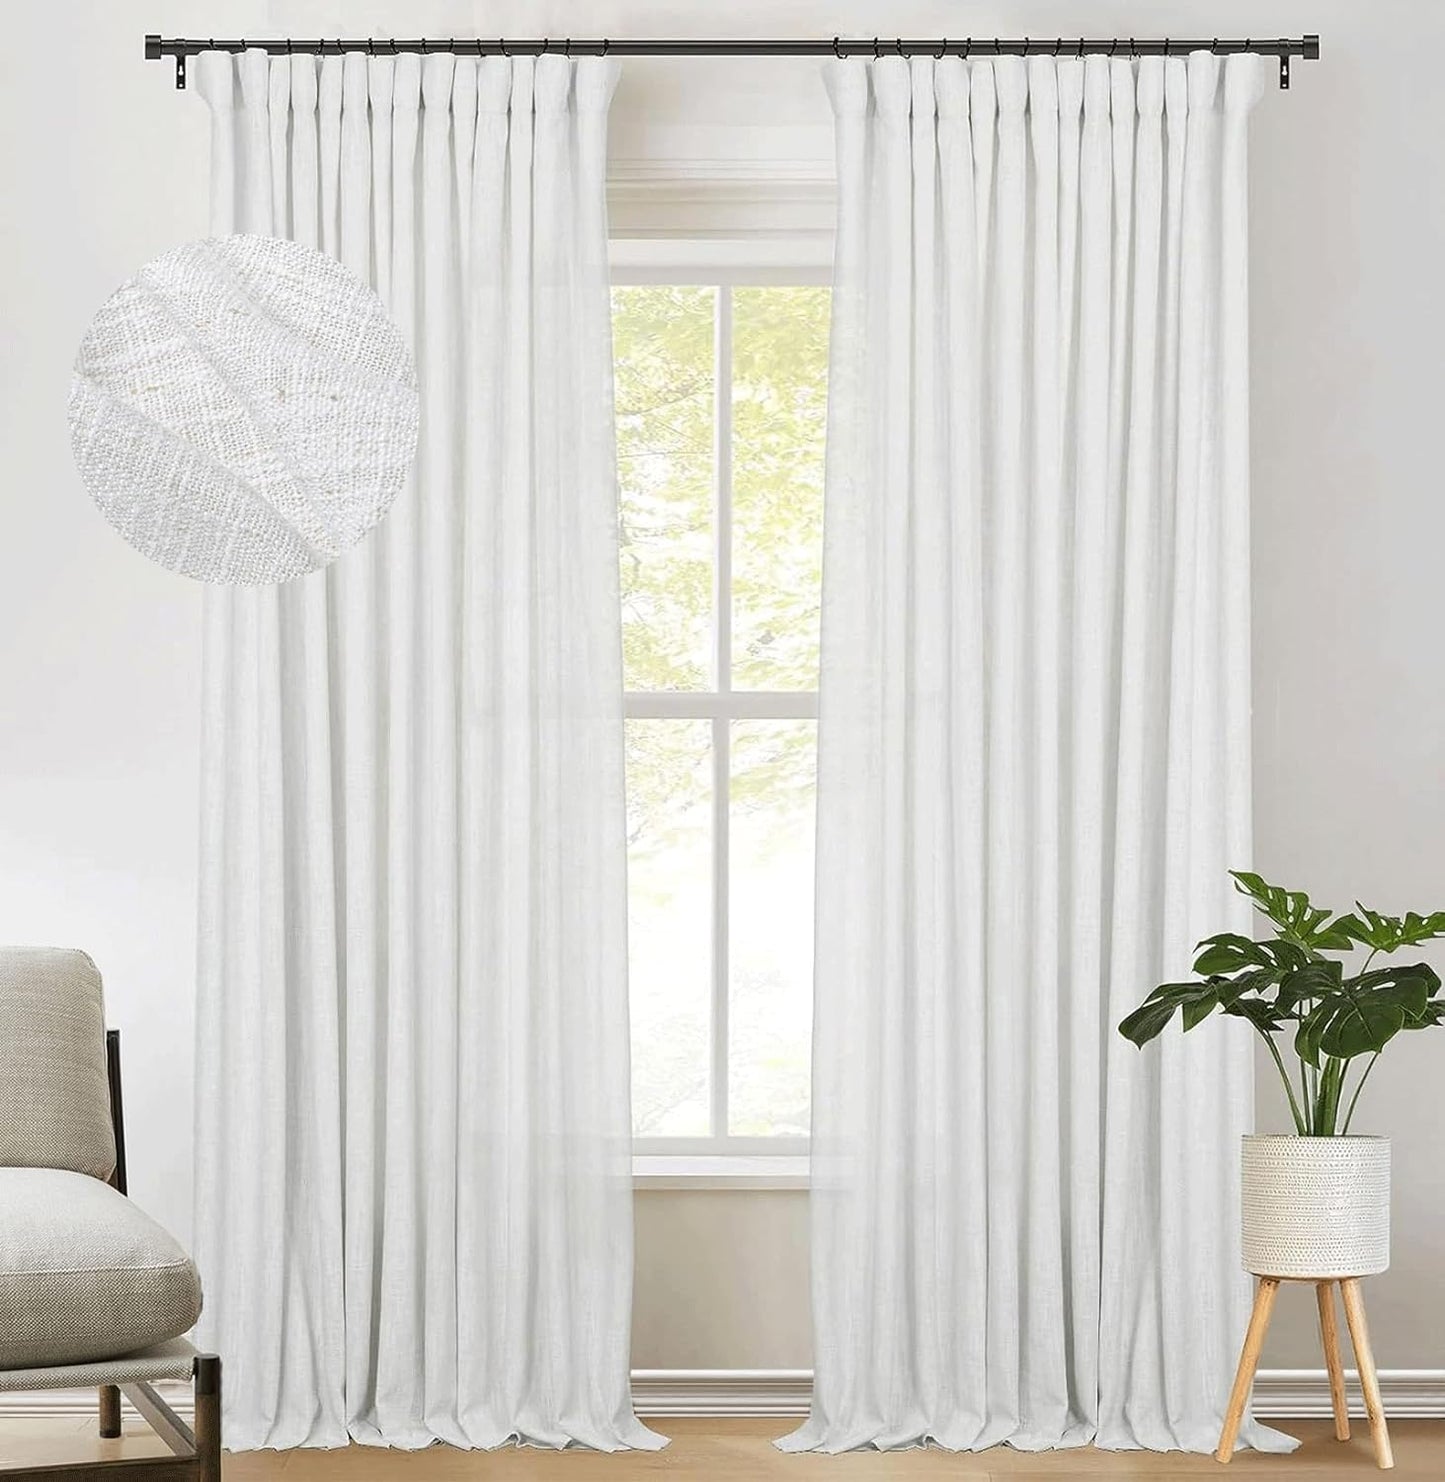 Zeerobee Beige White Linen Curtains for Living Room/Bedroom Linen Curtains 96 Inches Long 2 Panels Linen Drapes Farmhouse Pinch Pleated Curtains Light Filtering Privacy Curtains, W50 X L96  zeerobee 02 White 50"W X 90"L 